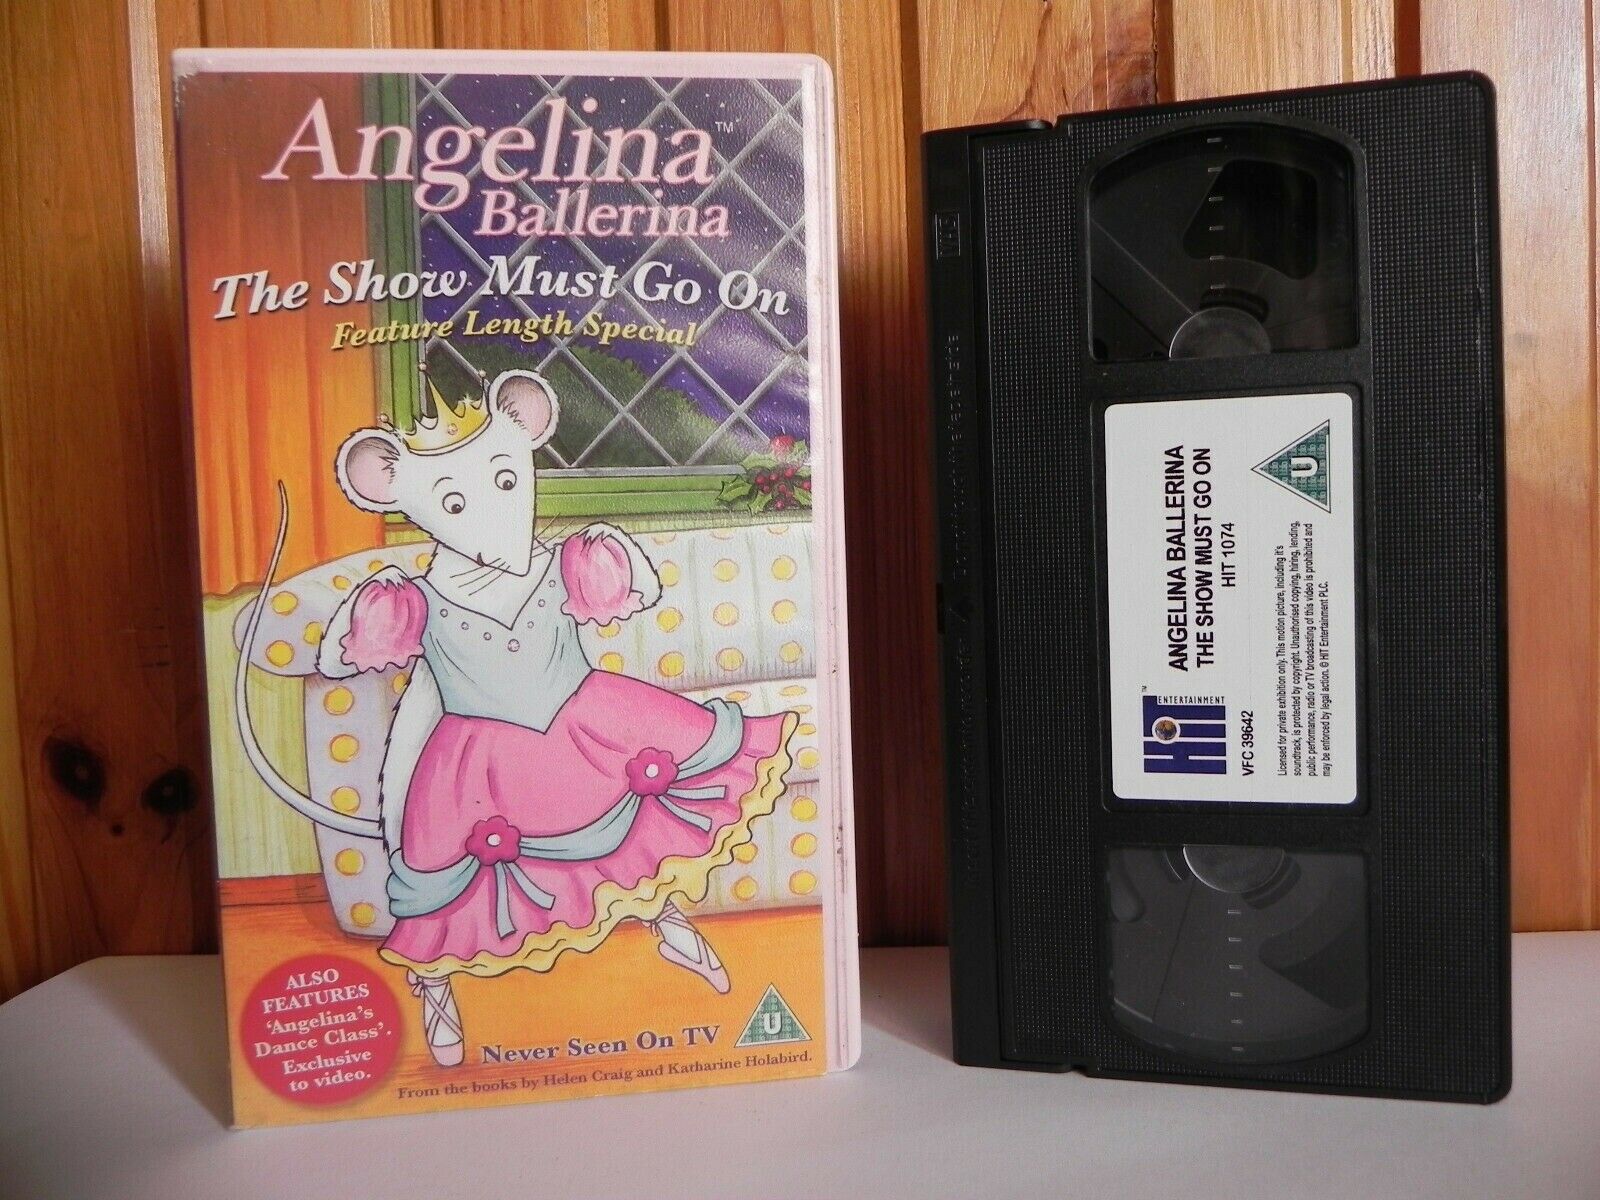 Angelina Ballerina: The Show Must Go On - Animated - Adventure - Kids - Pal VHS-